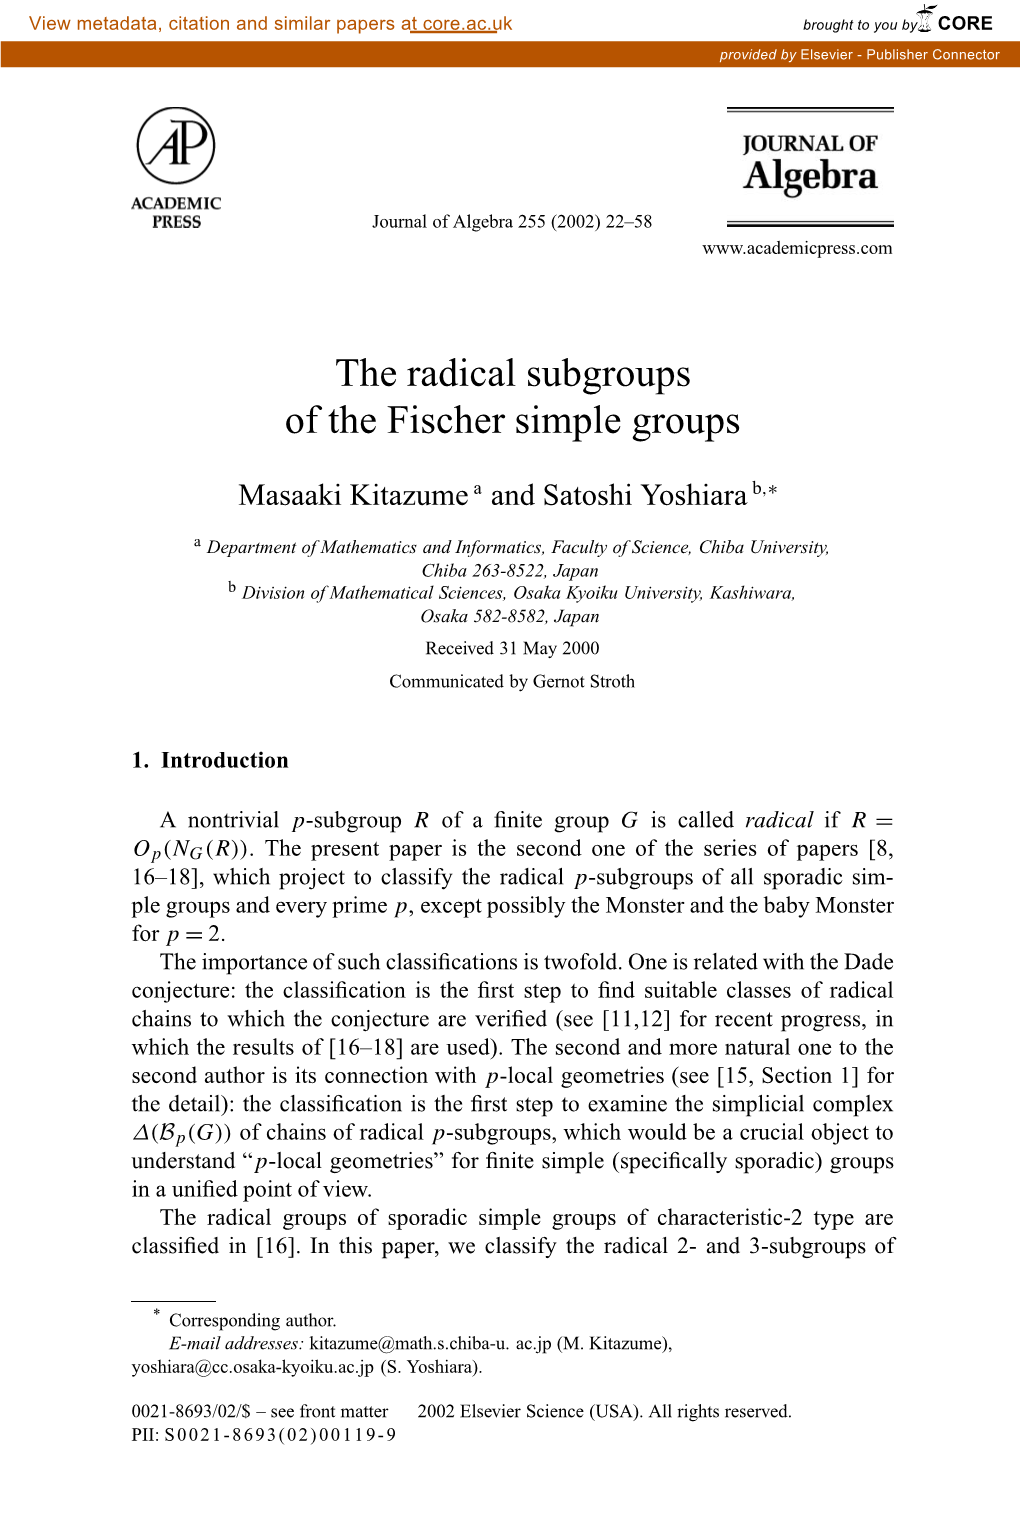 The Radical Subgroups of the Fischer Simple Groups